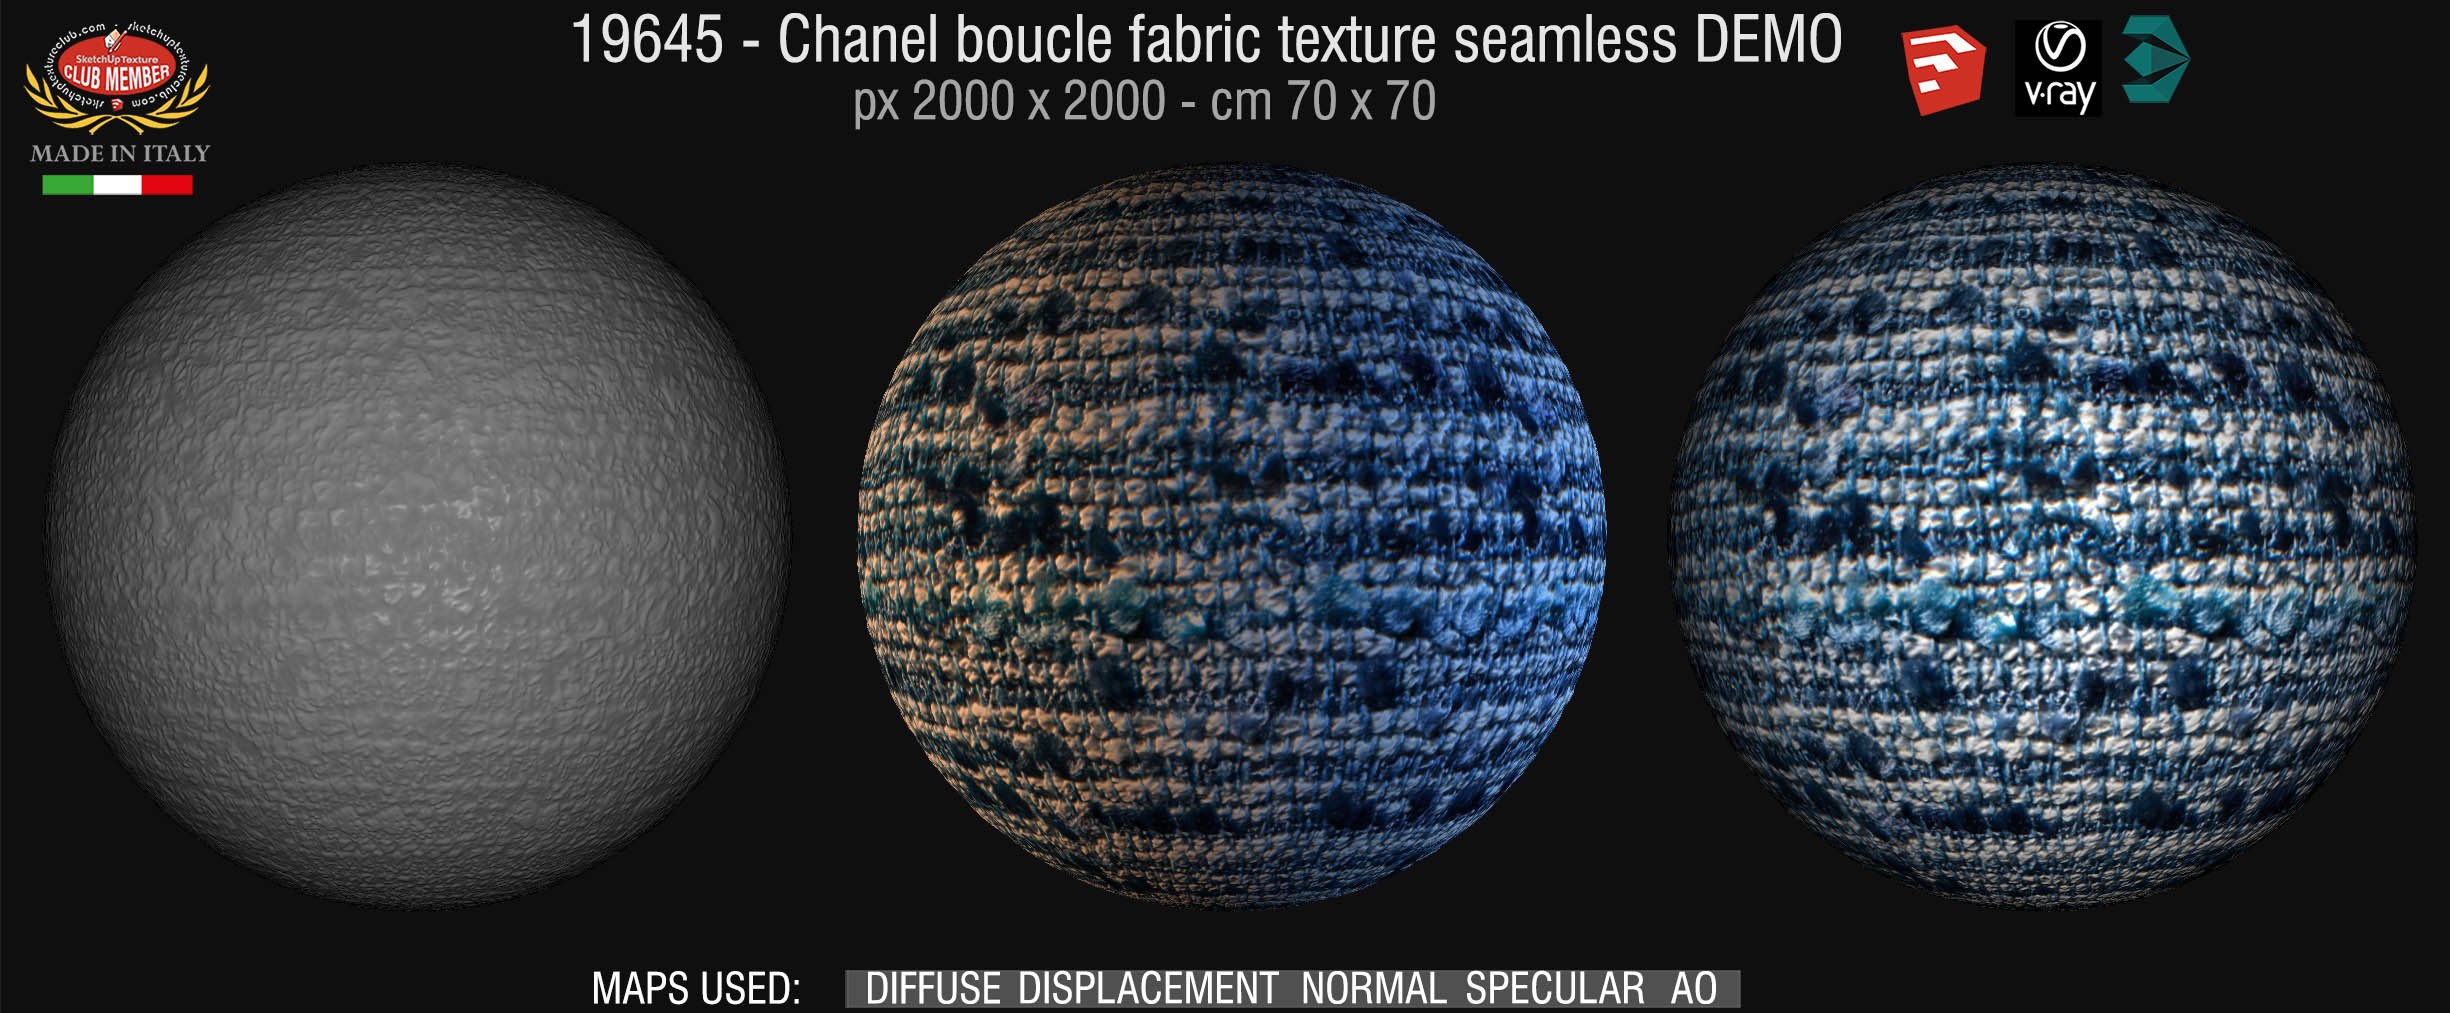 19645 Chanel boucle fabric texture seamless + maps DEMO